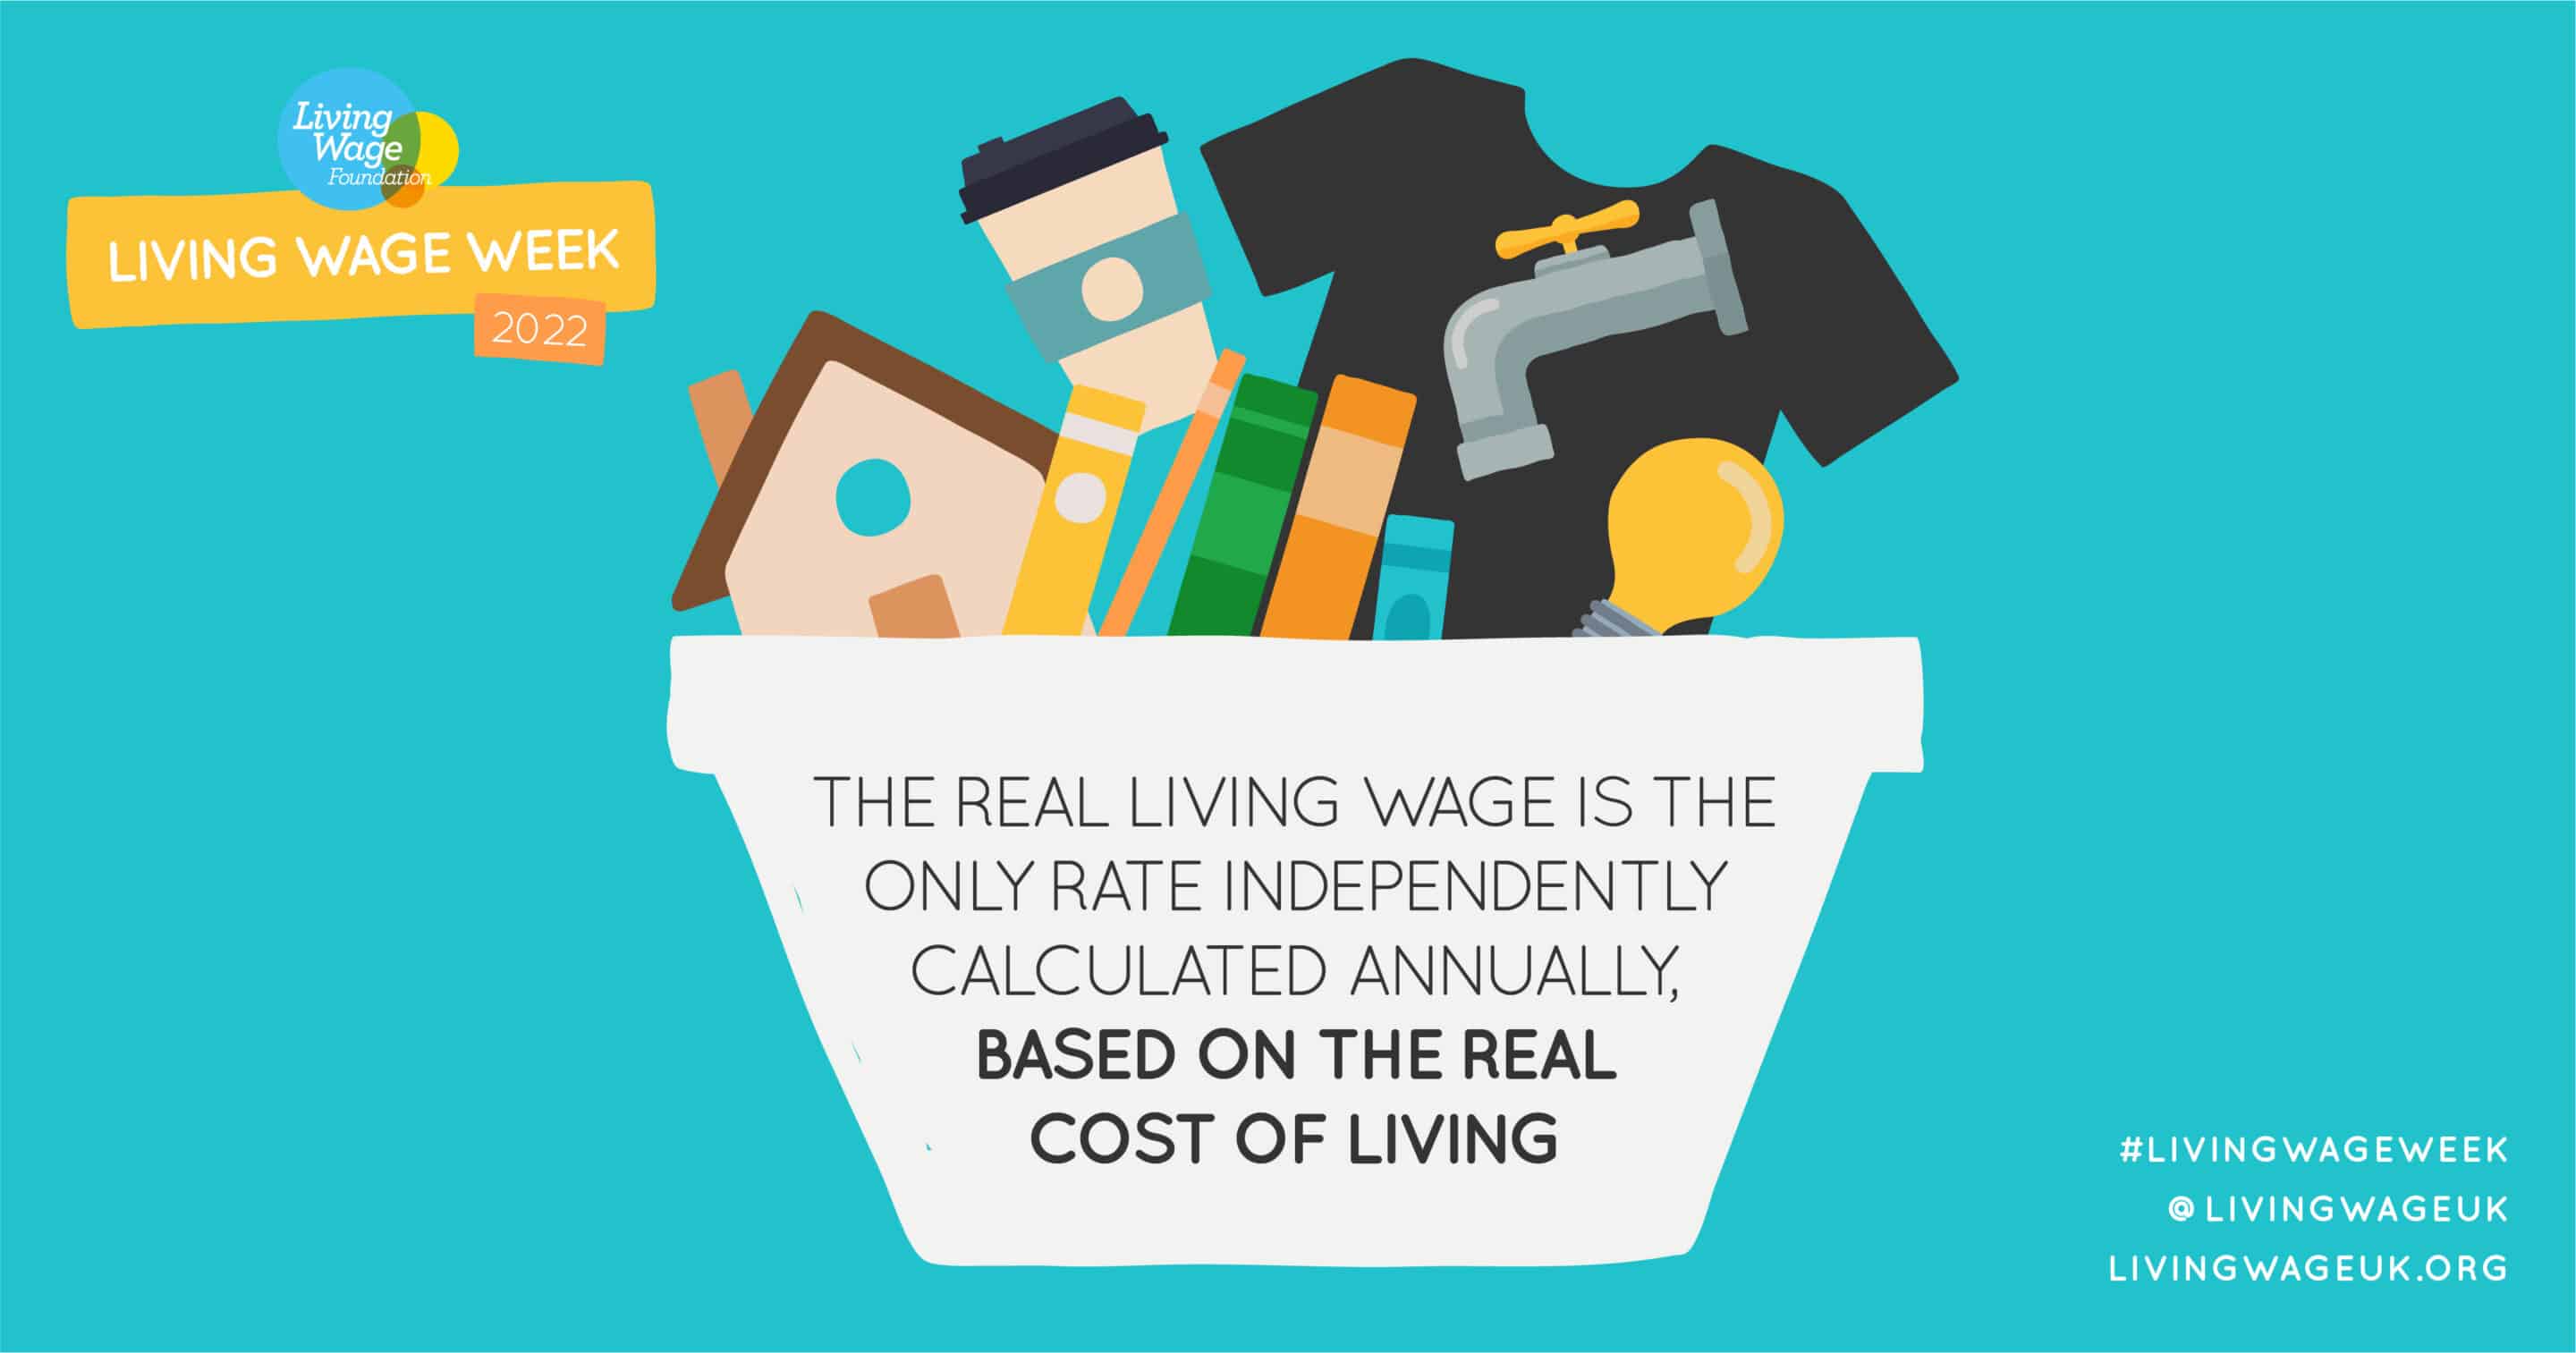 Living Wage is based on the real cost of living